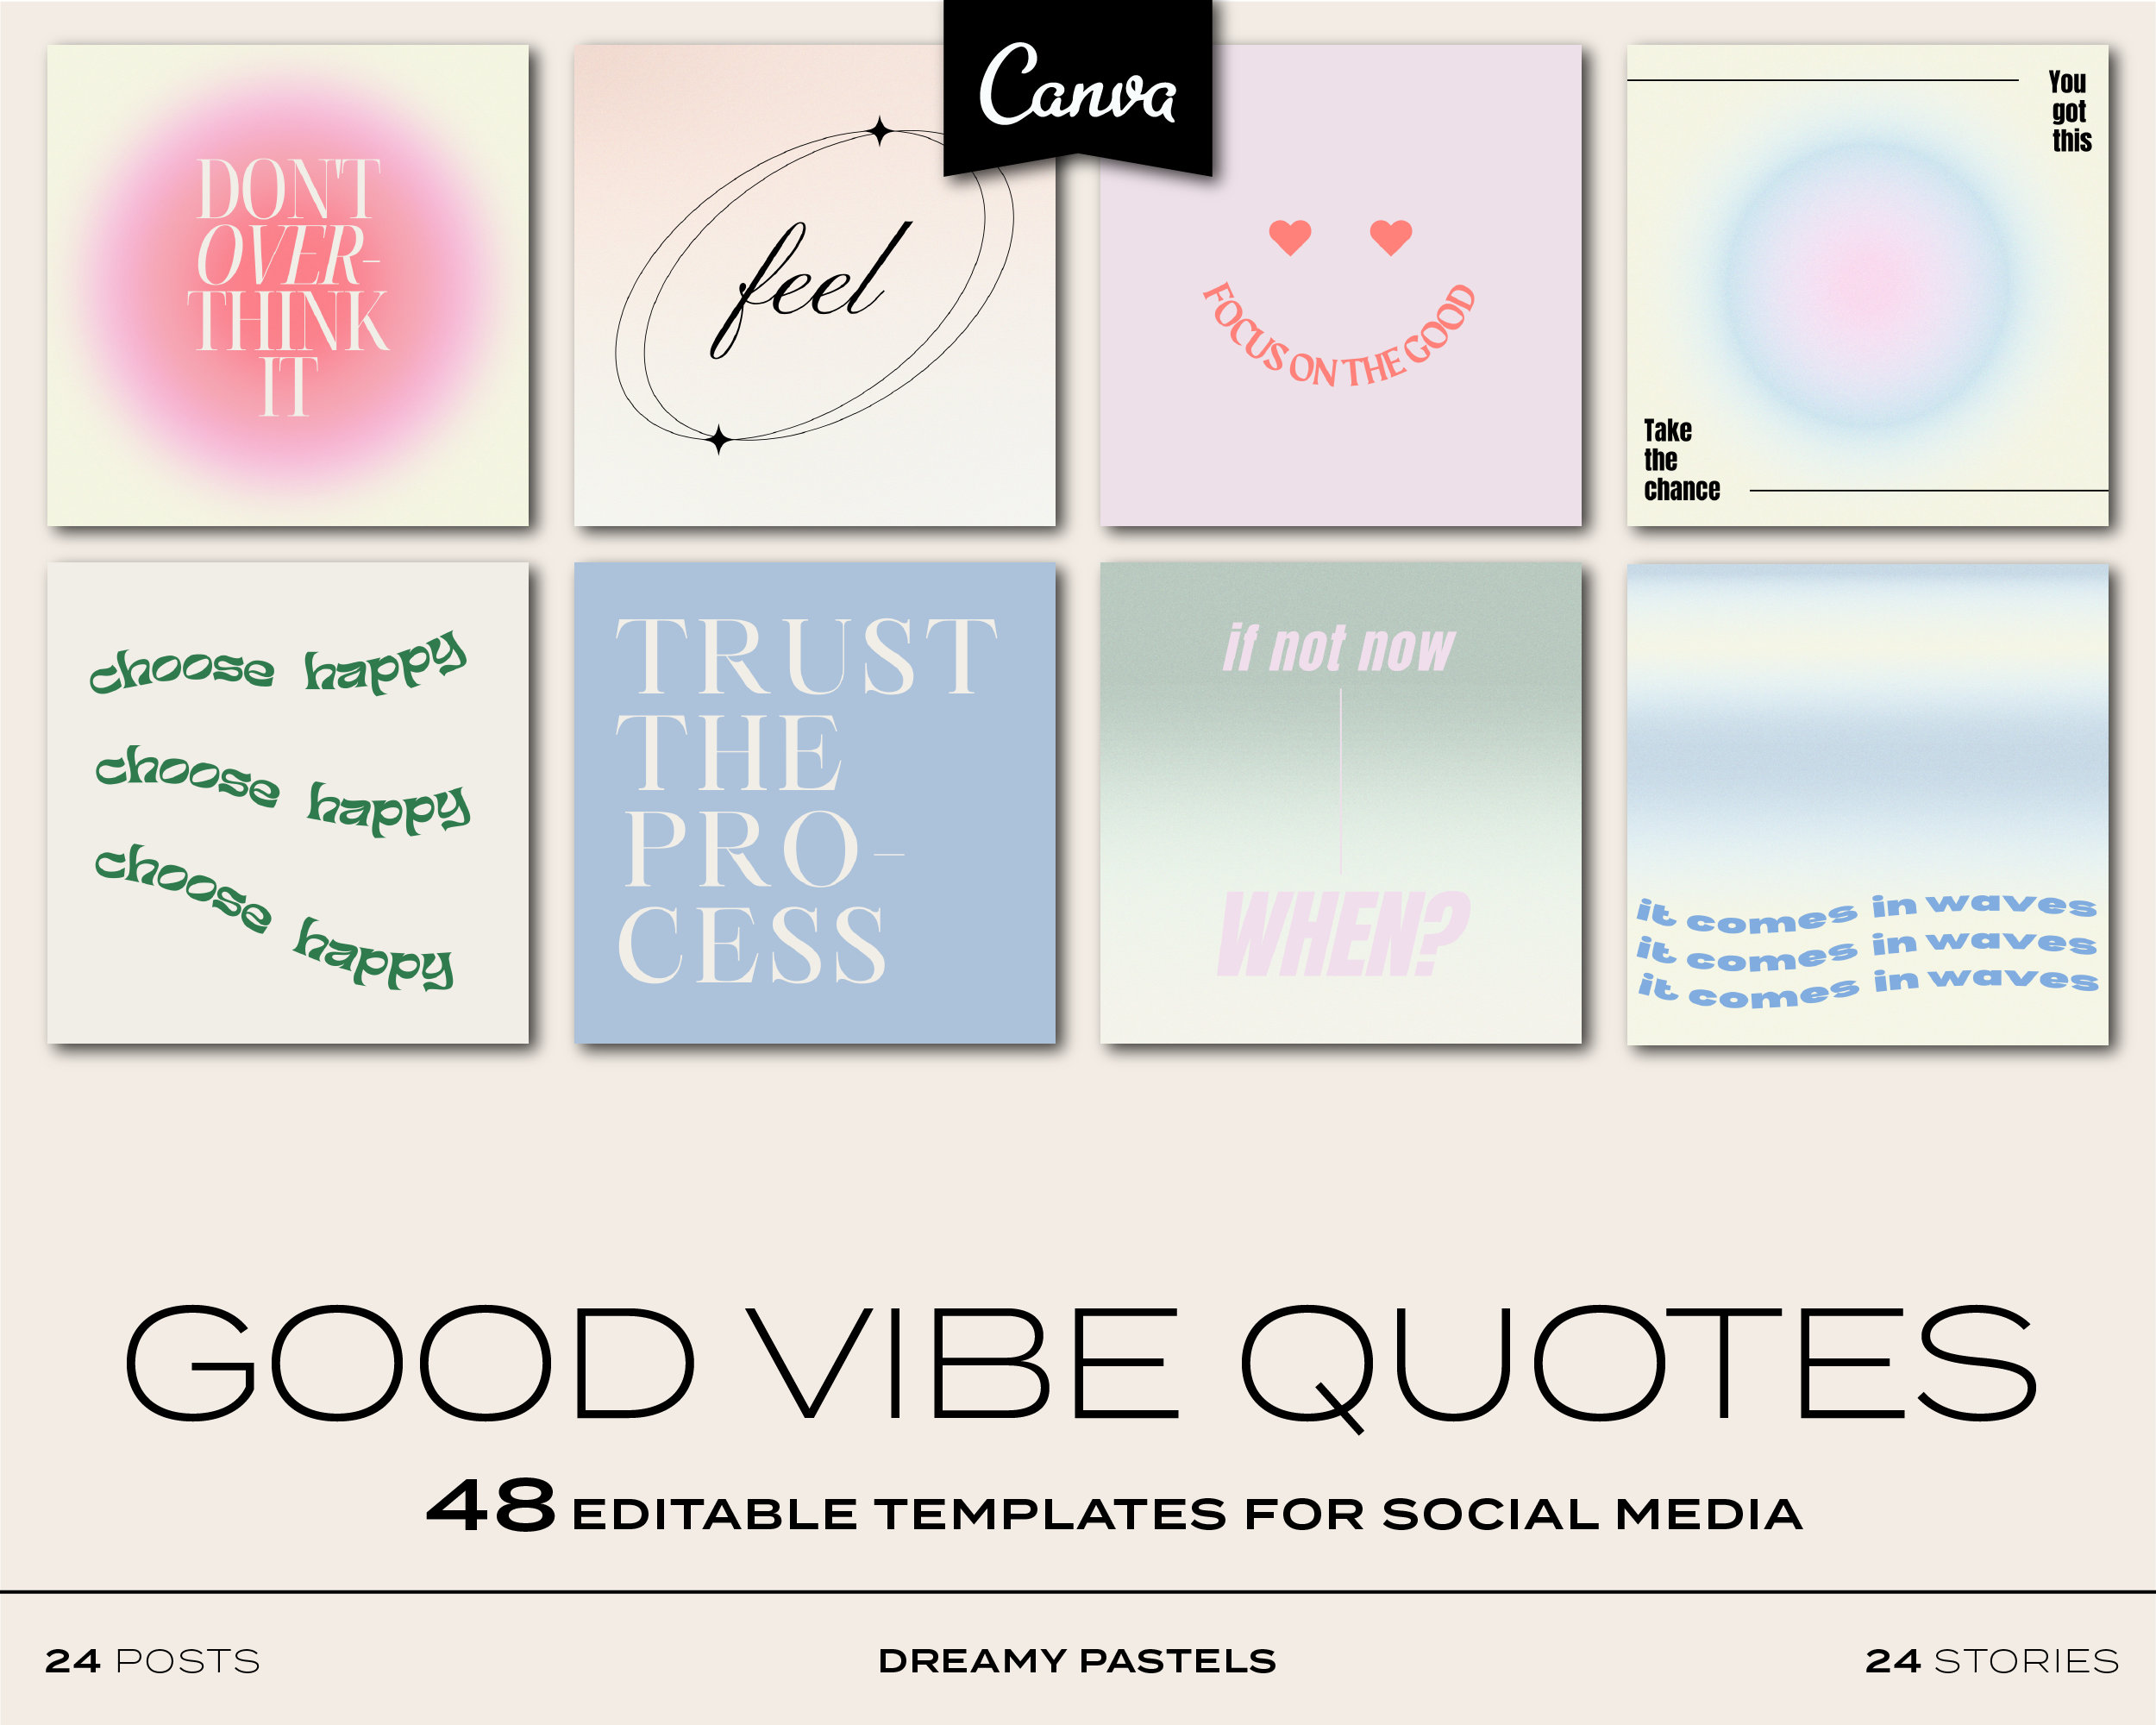 PASTEL GRADIENT Instagram Inspirational Quote Template Canva - Etsy